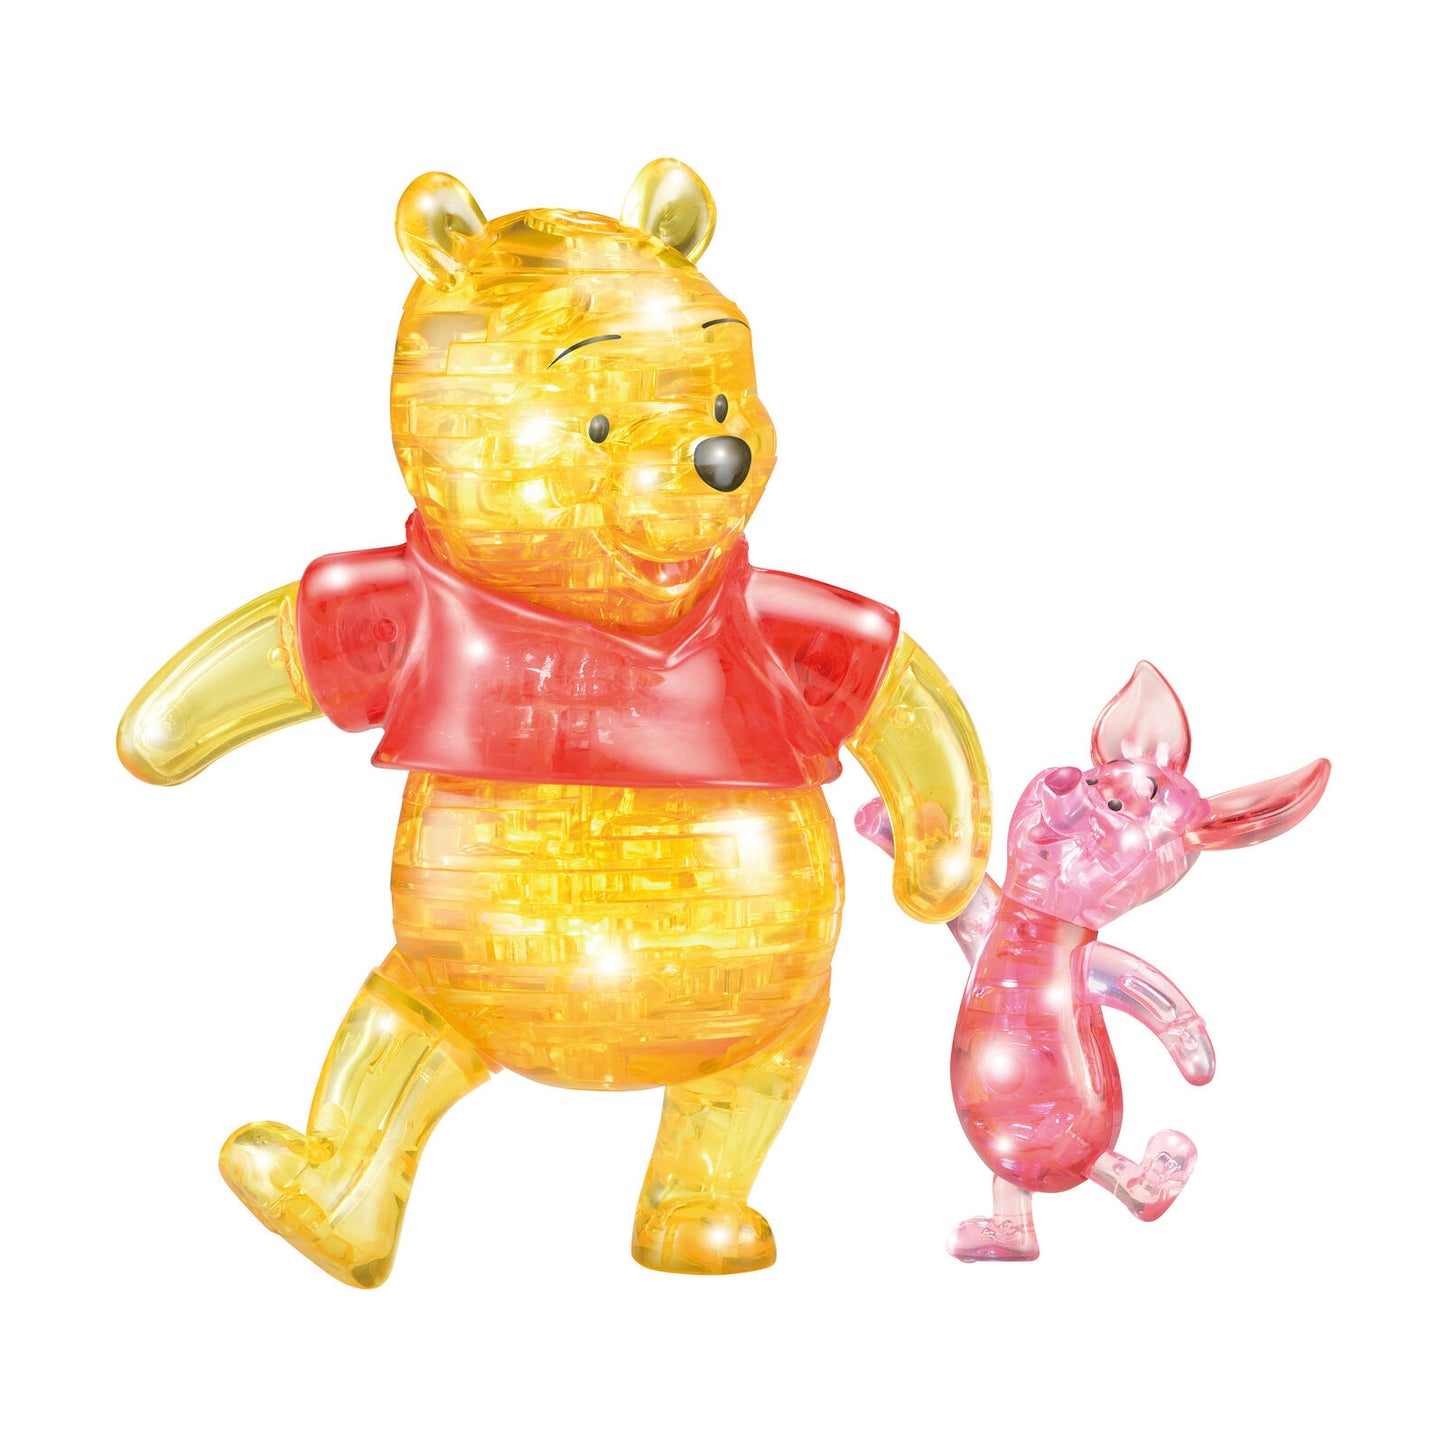 3D Crystal Puzzle Winnie the Pooh & Piglet